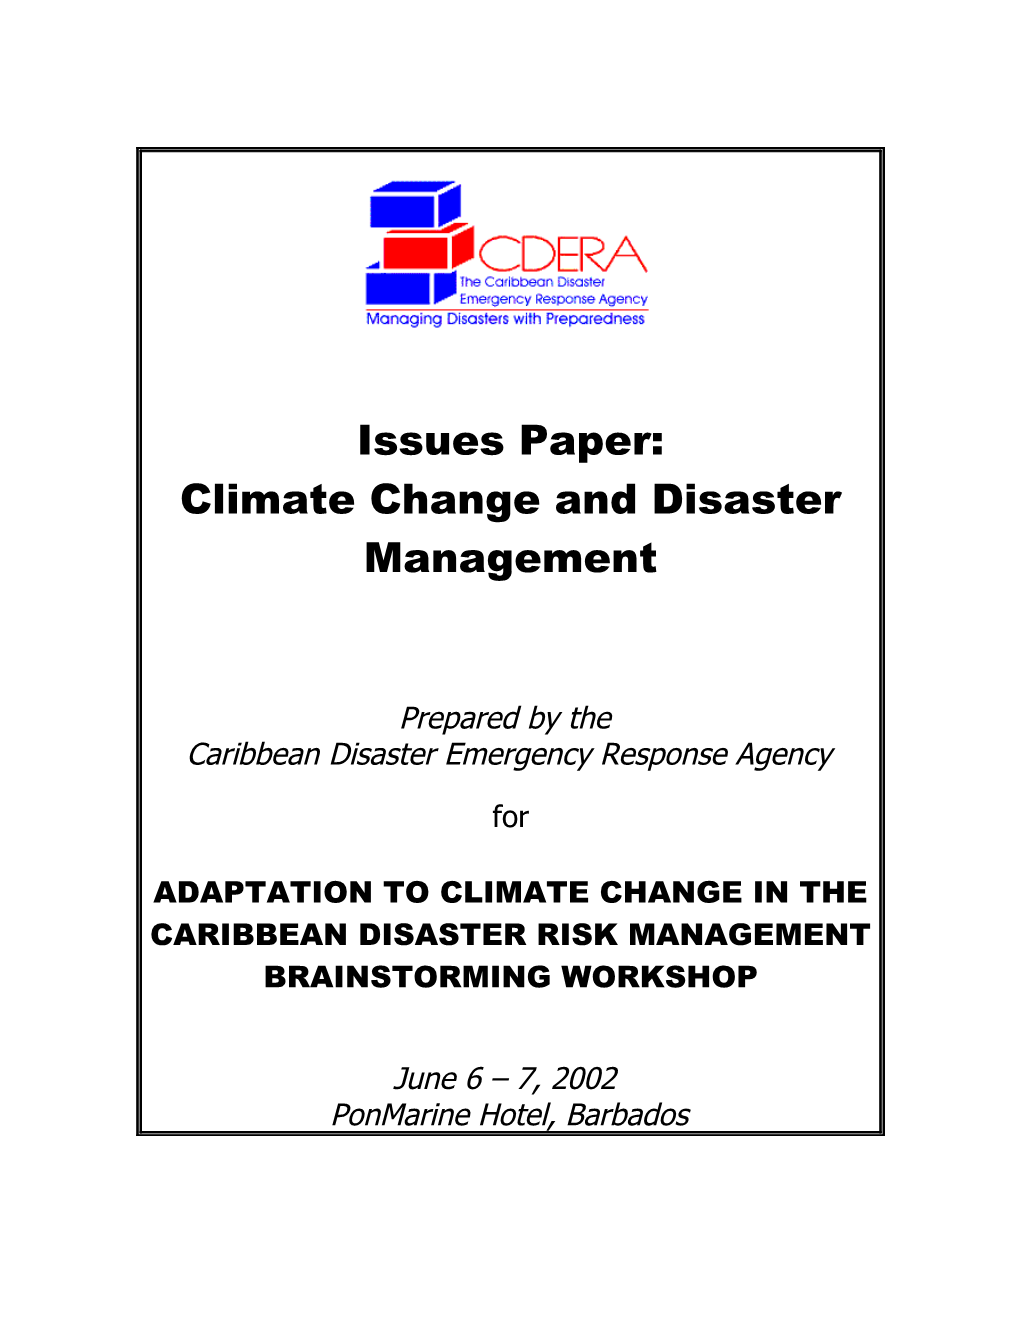 Disaster and Climate Change Issues Paper